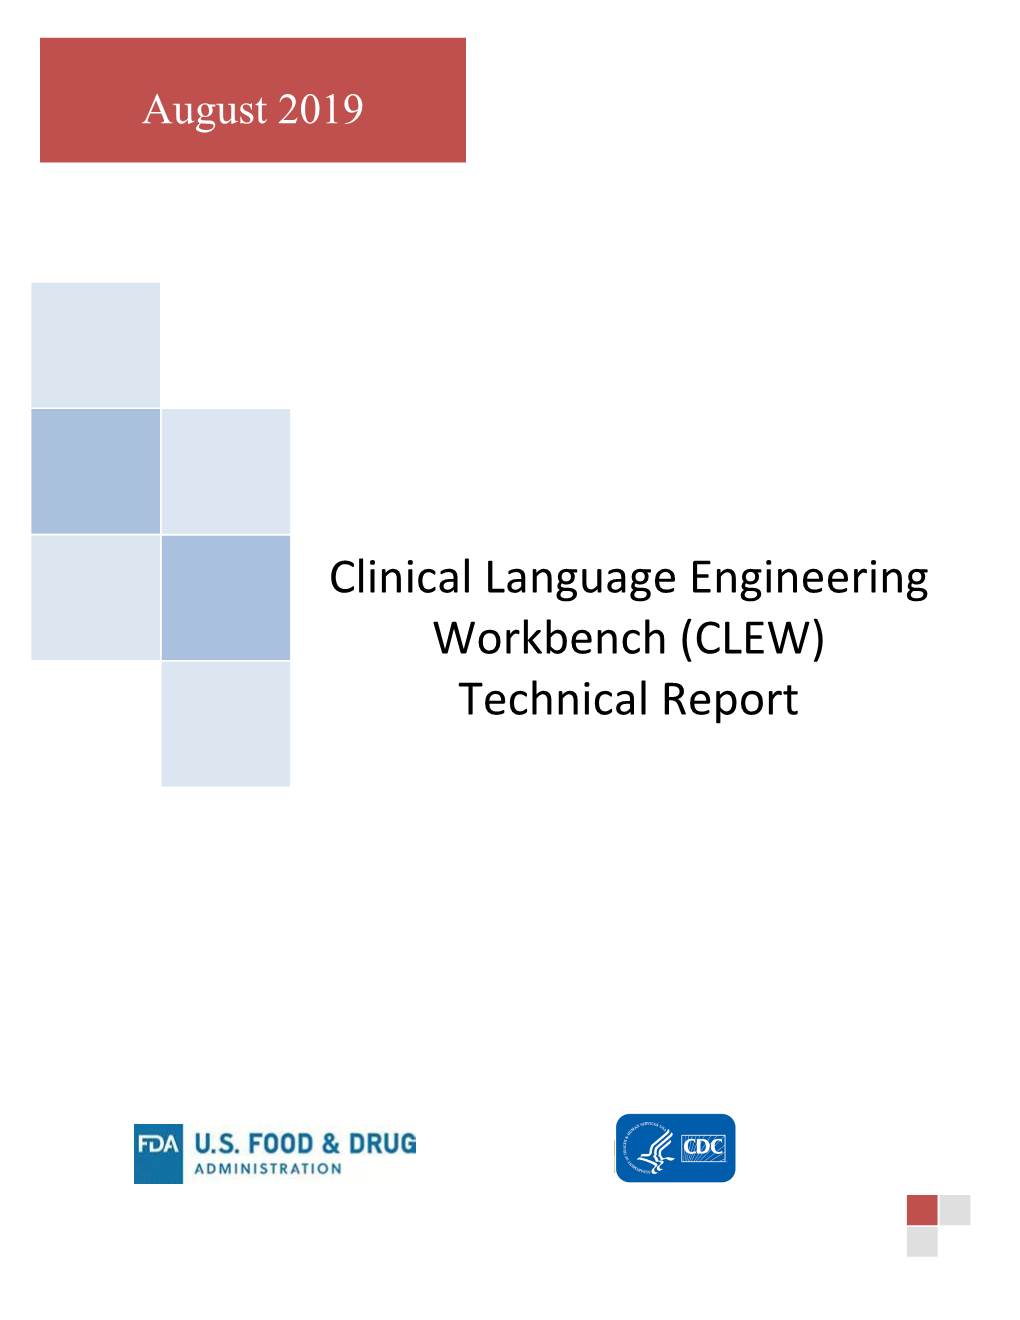 CLEW) Technical Report